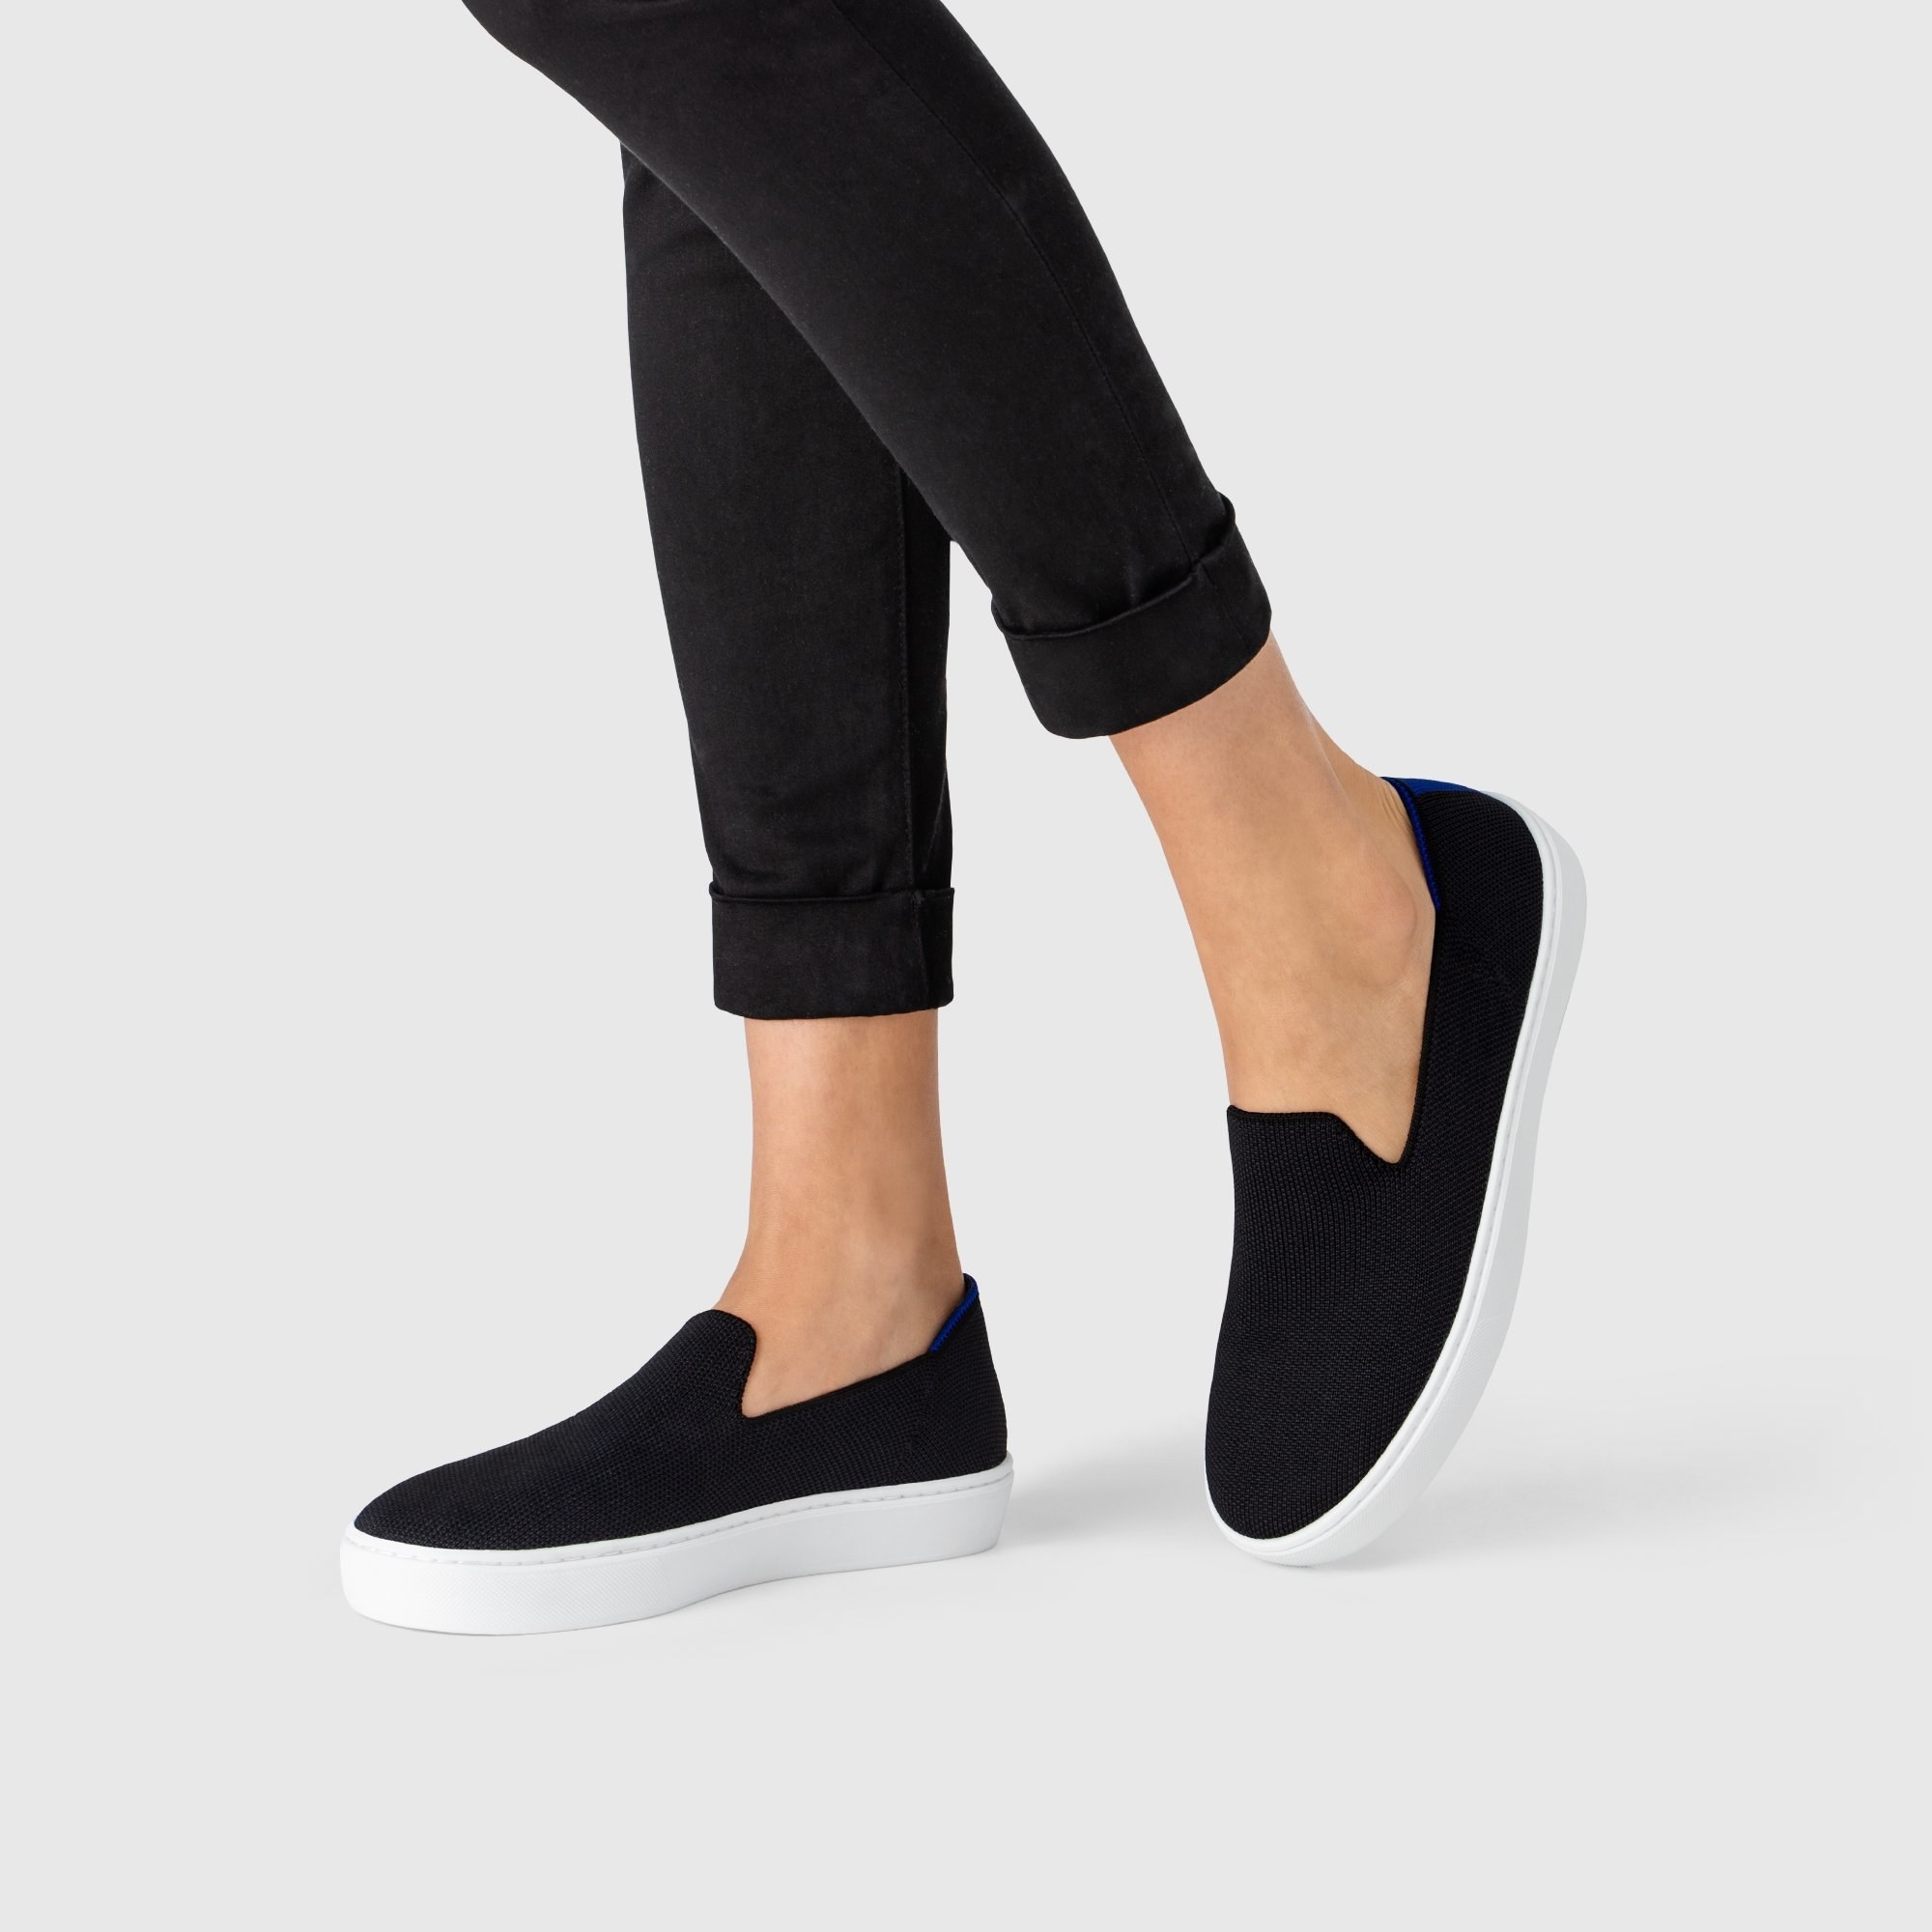 The black slip-on shoes with thick white soles